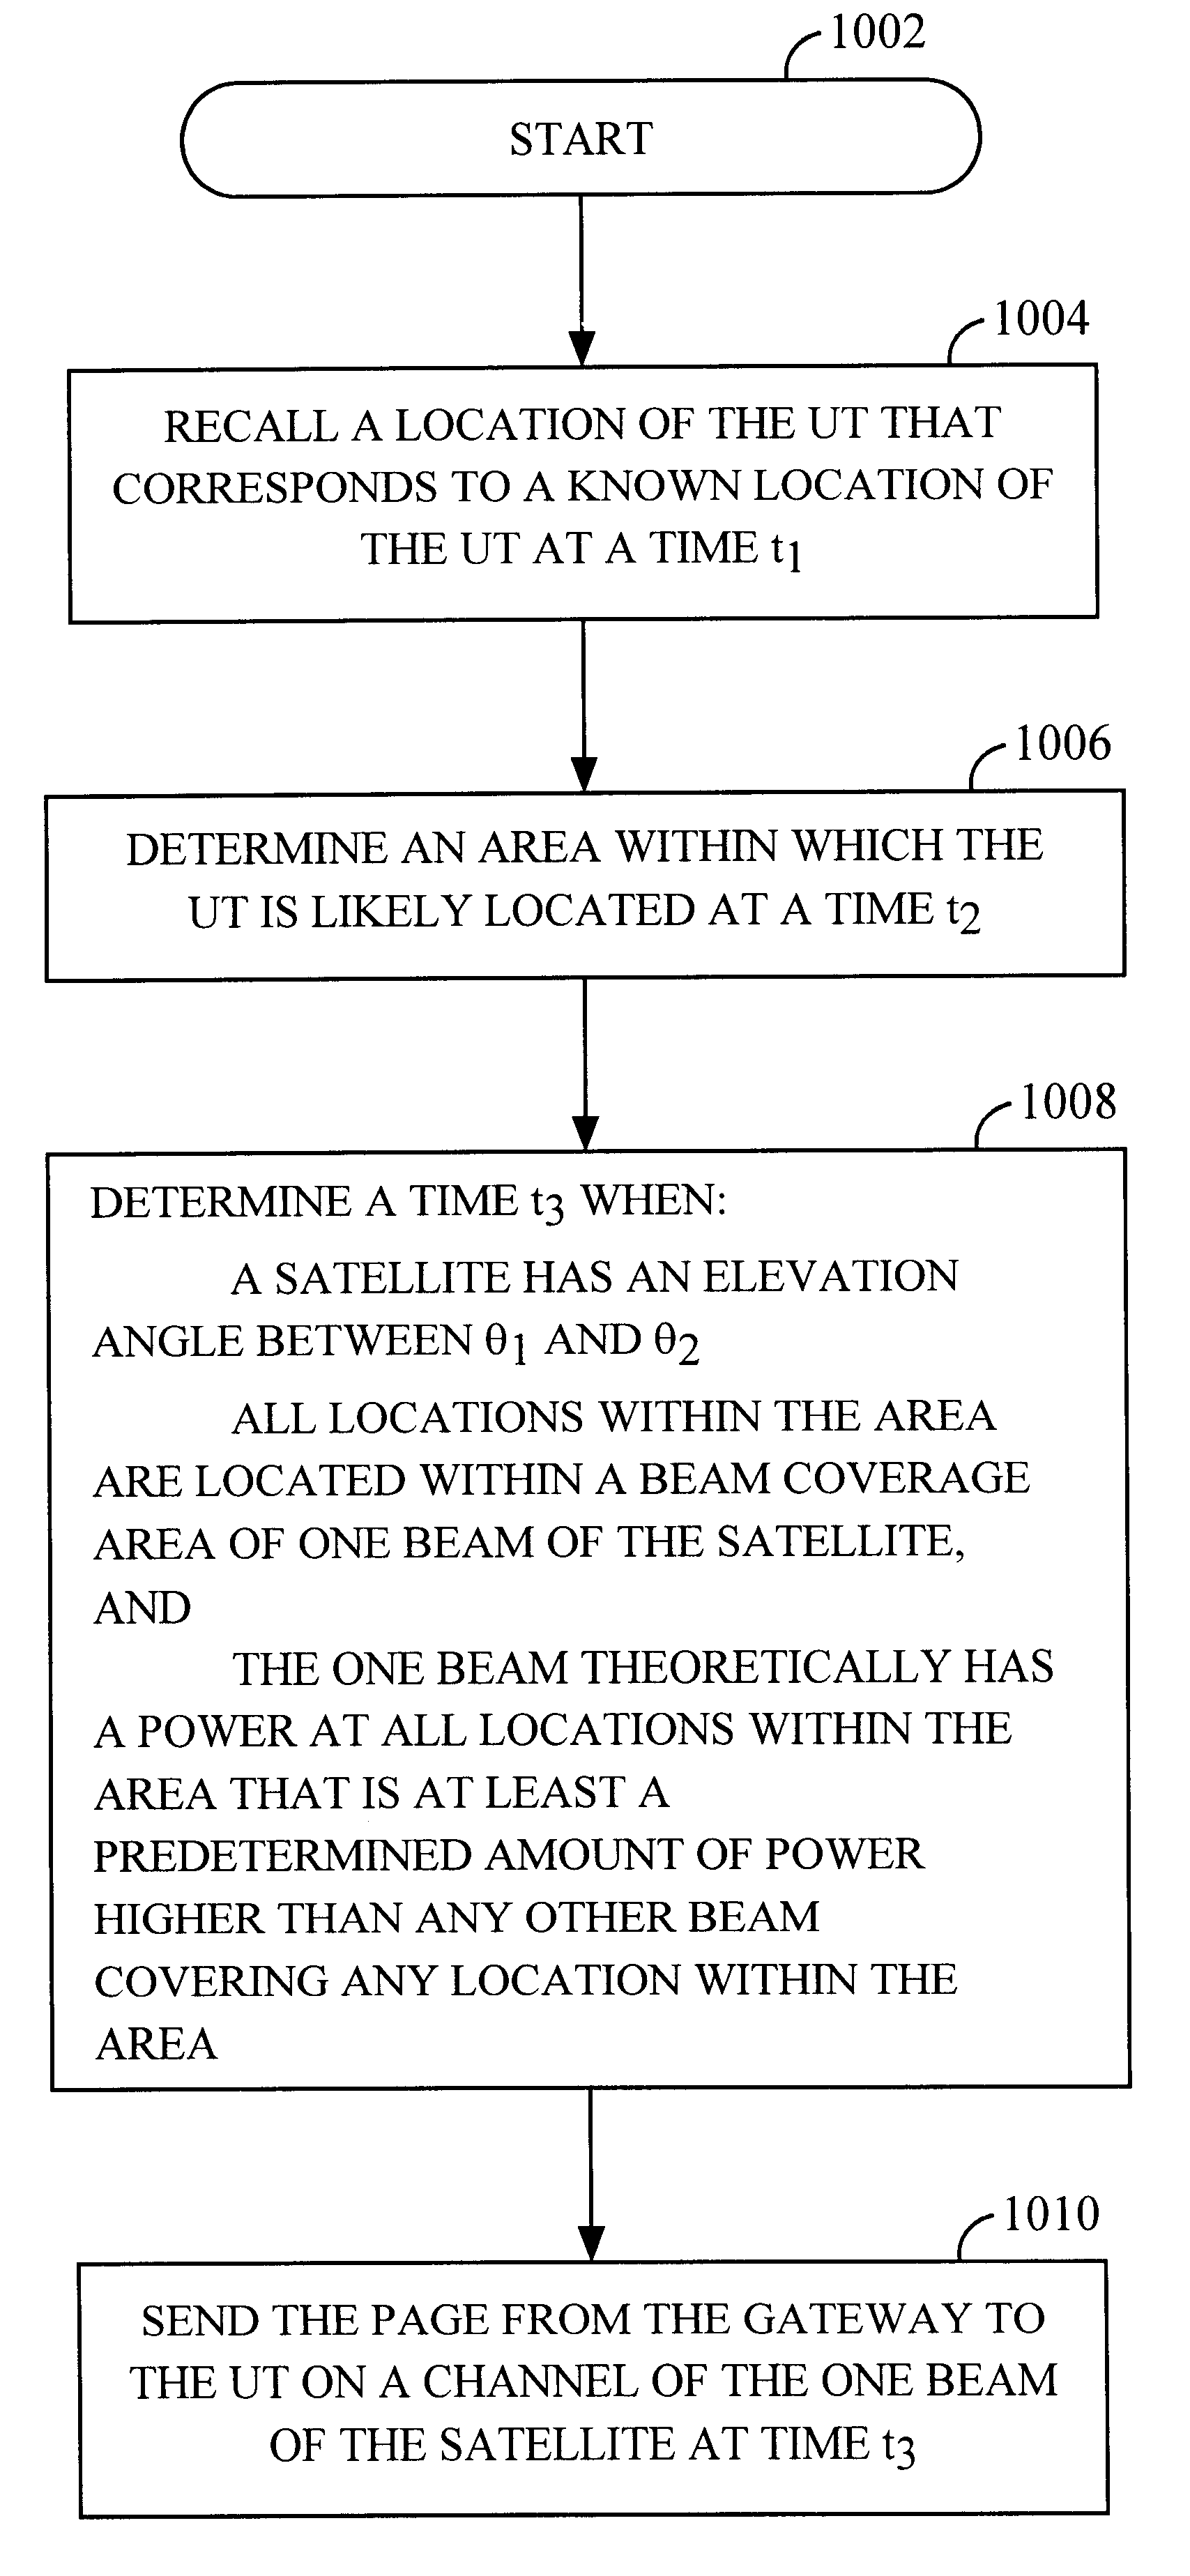 Method and apparatus for paging a user terminal within the "sweet spot" of a satellite